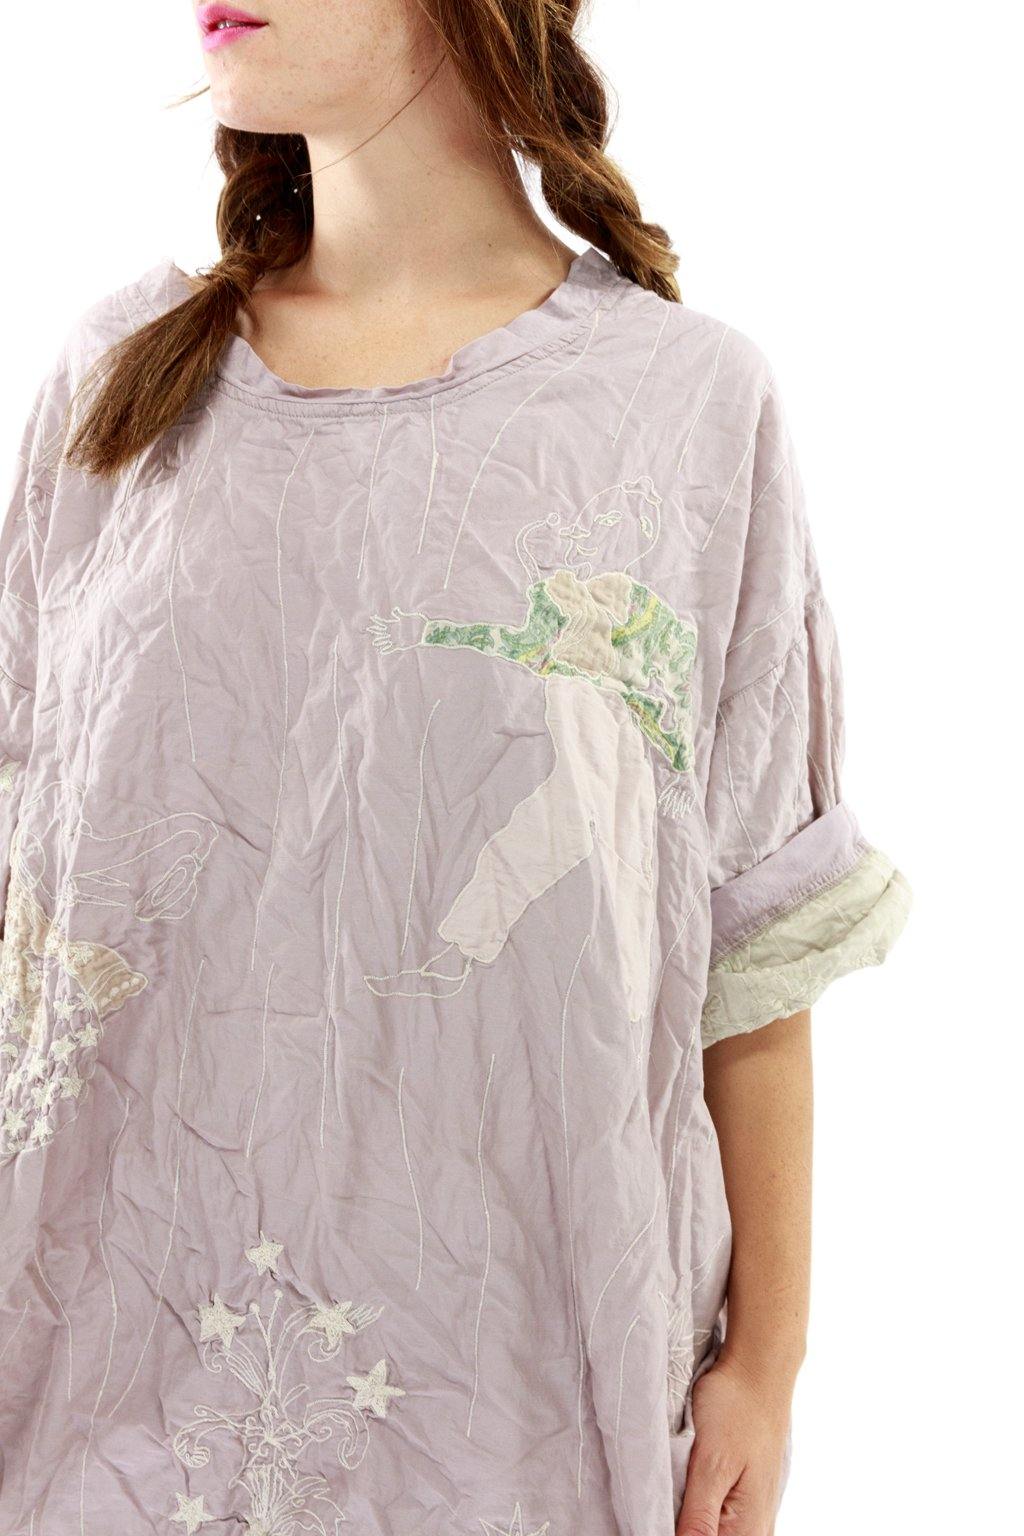 Quilted Oversized Francis Top - Magnolia Pearl Clothing